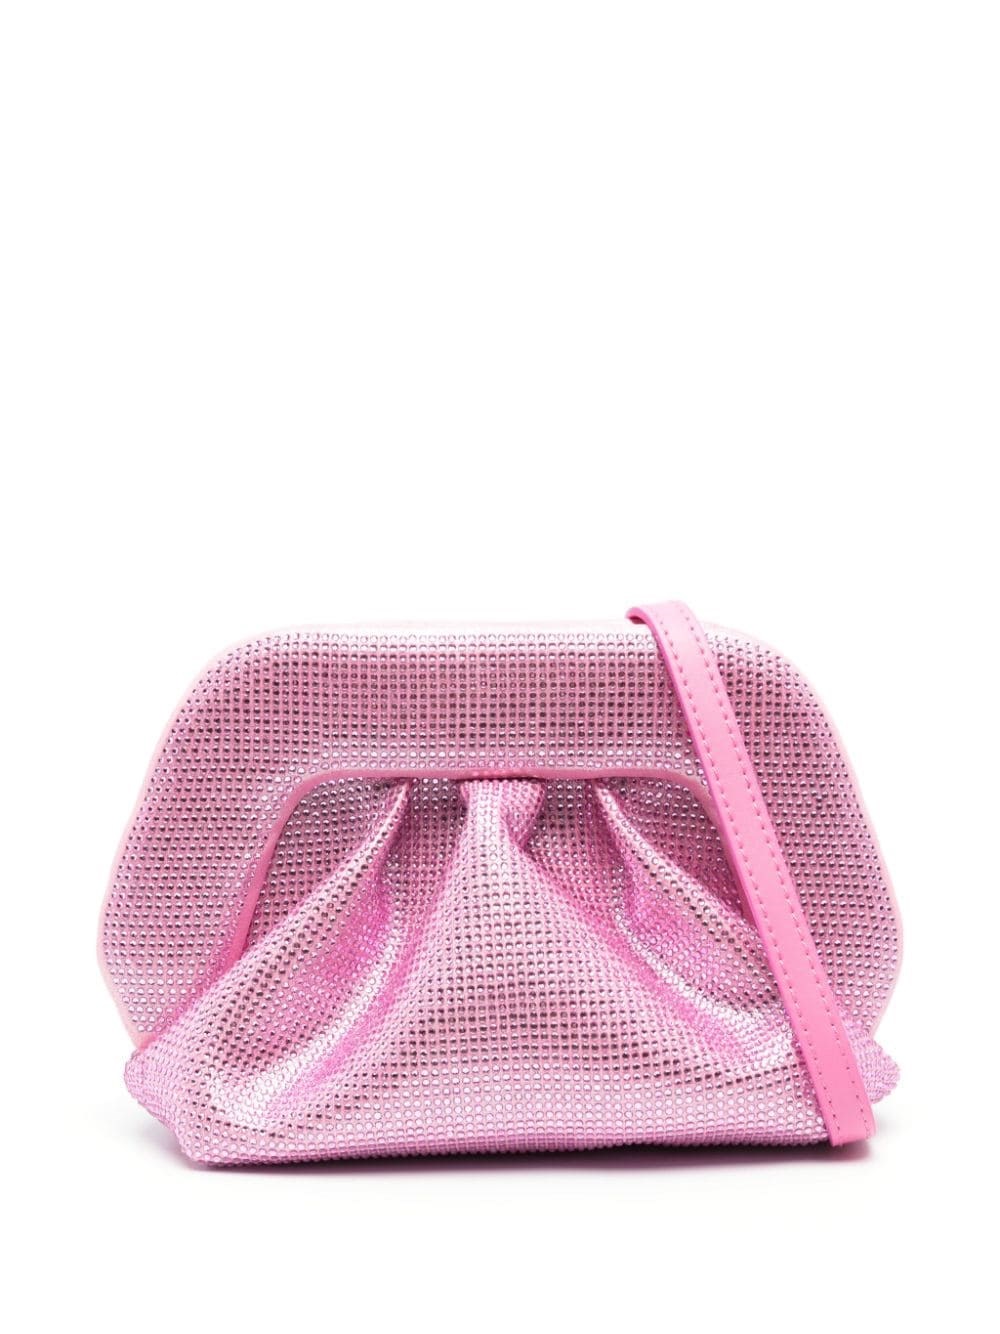 Shop Themoire' Gea Clutch Bag Embellished With Rhinestones In Pink & Purple